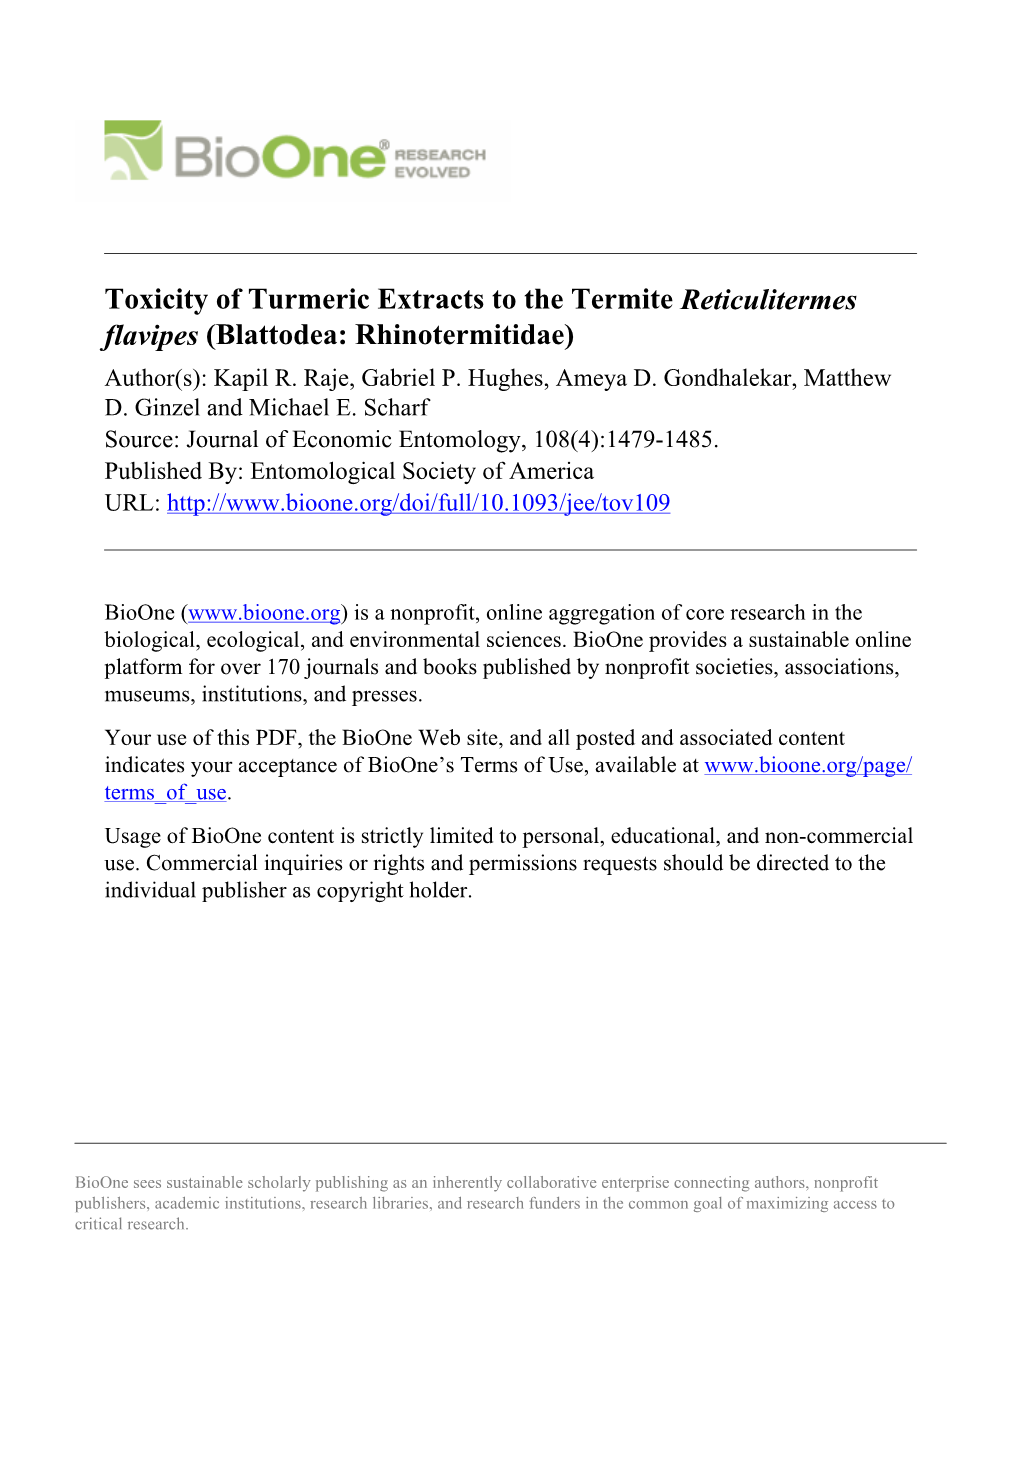 Toxicity of Turmeric Extracts to the Termite Reticulitermes Flavipes (Blattodea: Rhinotermitidae) Author(S): Kapil R